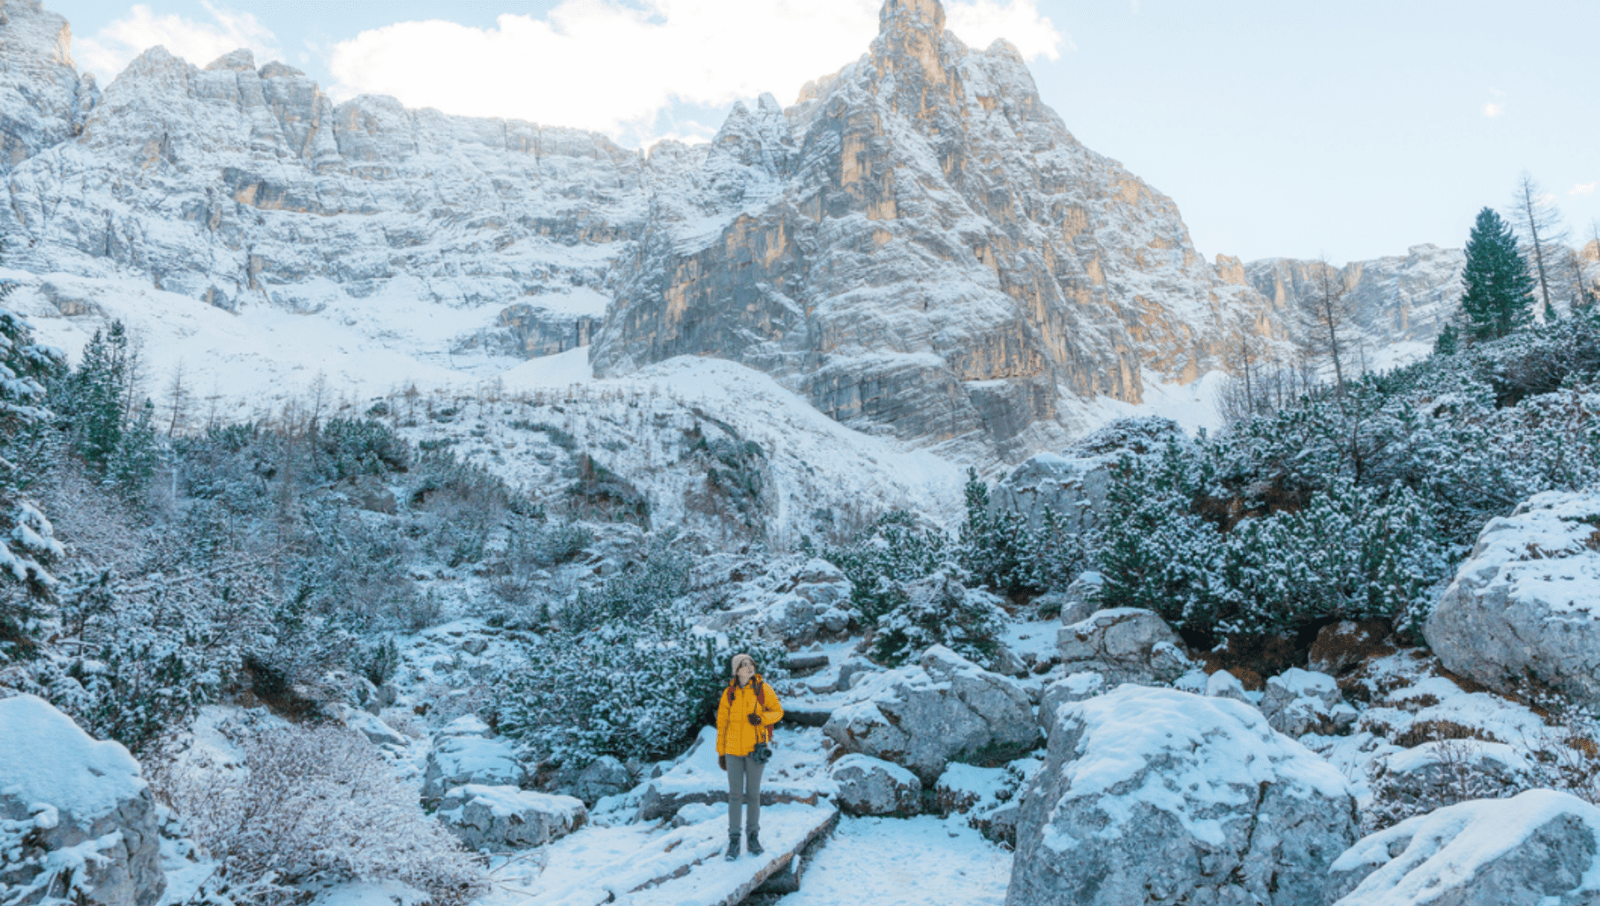 Lady in yellow puffer jacket hiking in the Dolomites surrounded by snowy mountains and trees